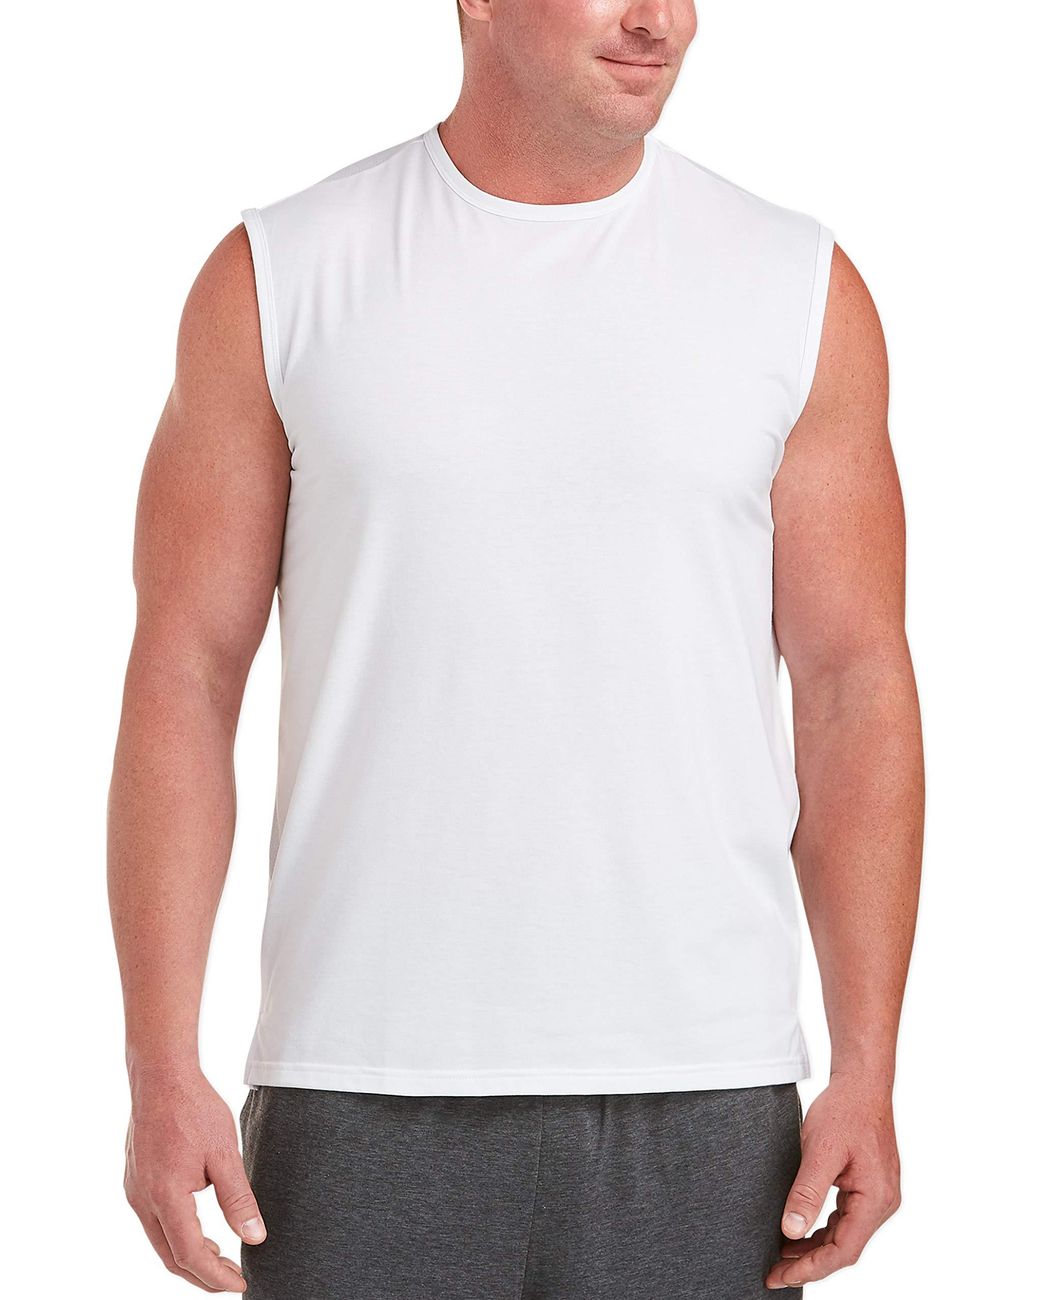 Amazon Essentials Big & Tall Performance Cotton Muscle Tank Fit By Dxl ...